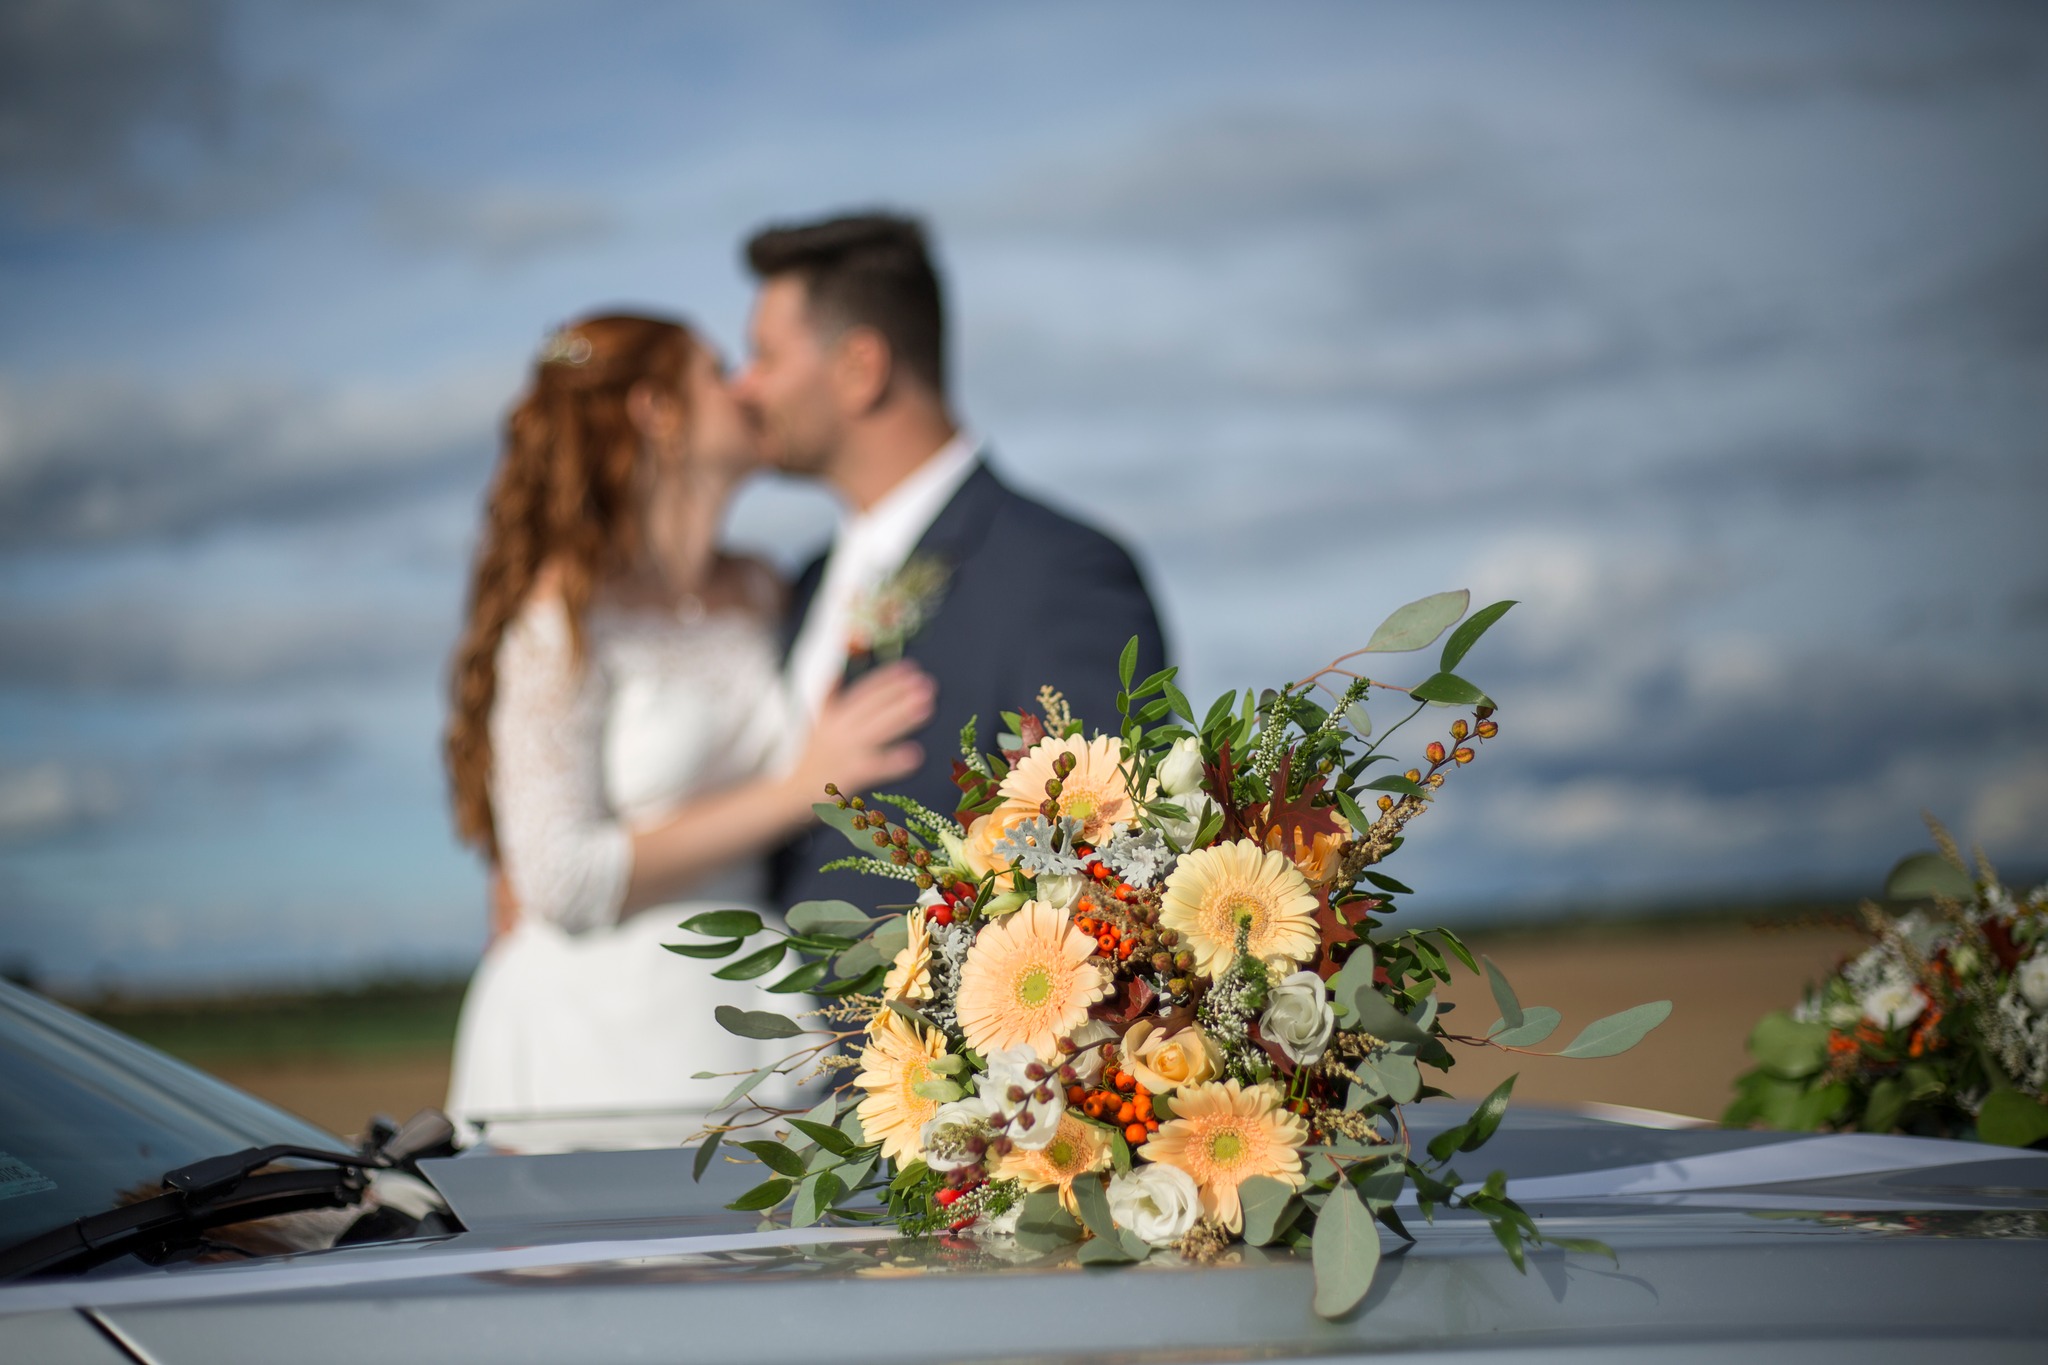 detail of wedding flowers and kissing bride and groom in background